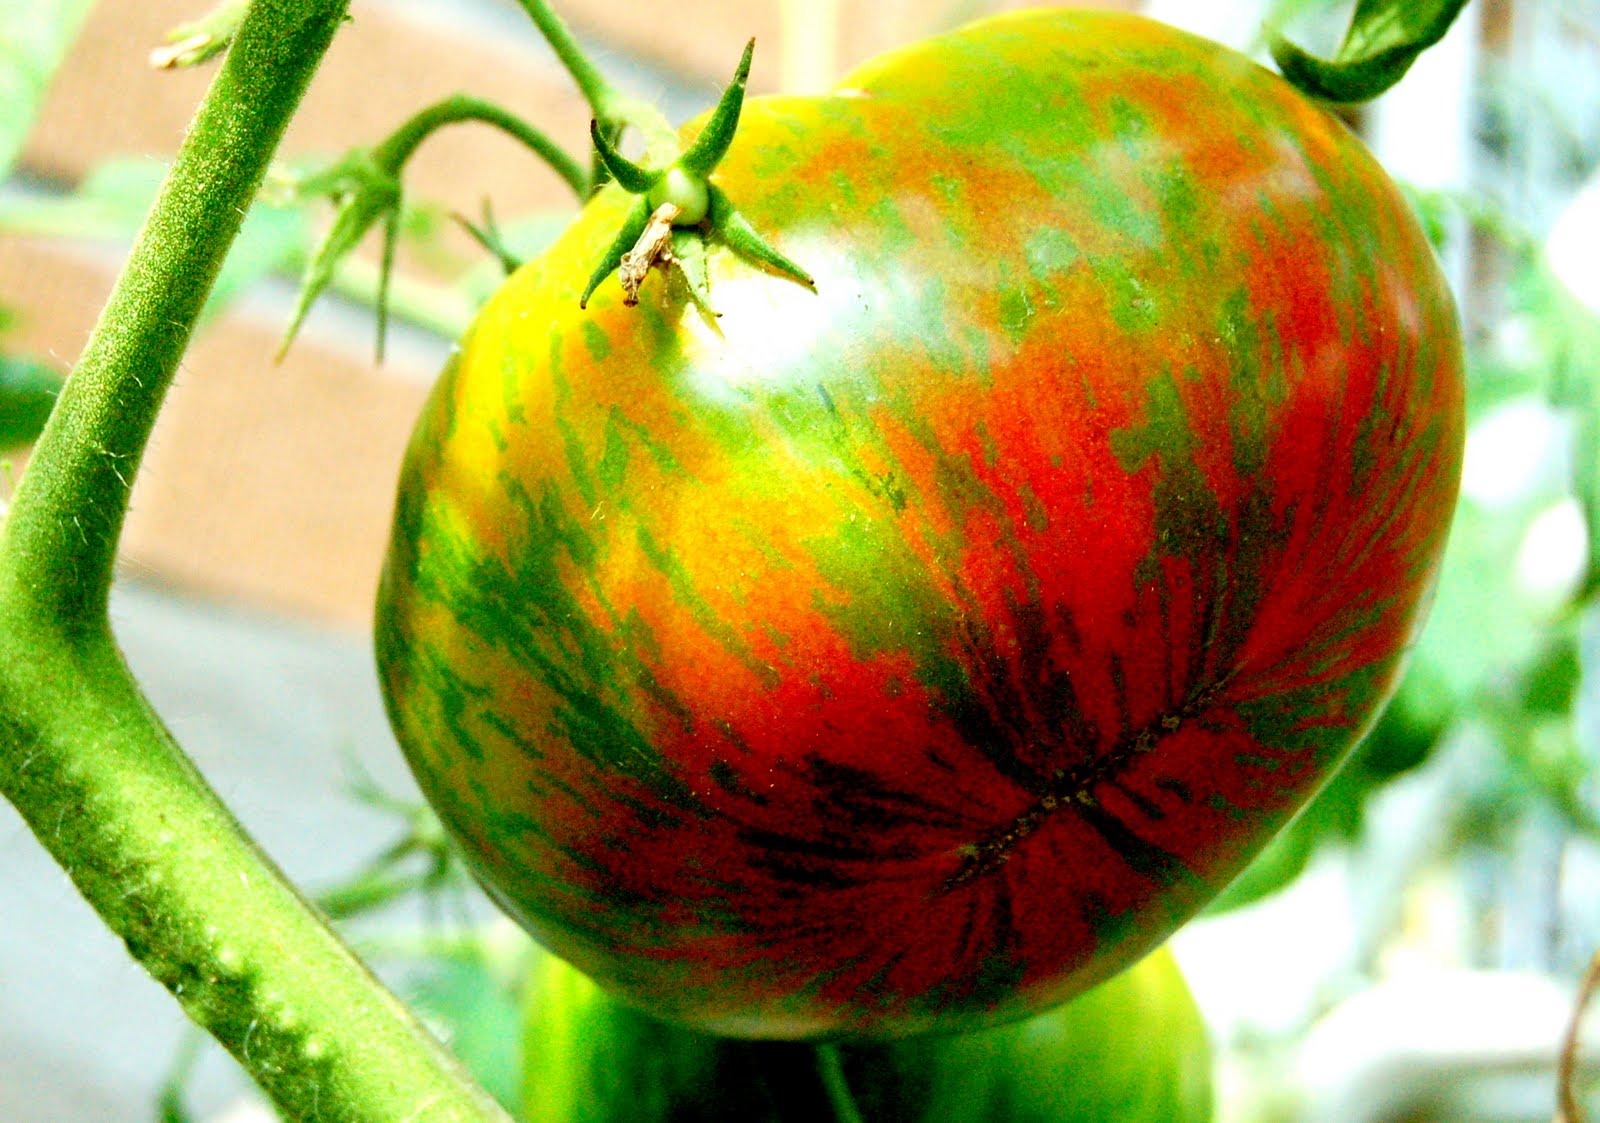 Why I Am Hooked On Ontario Heirloom Tomatoes